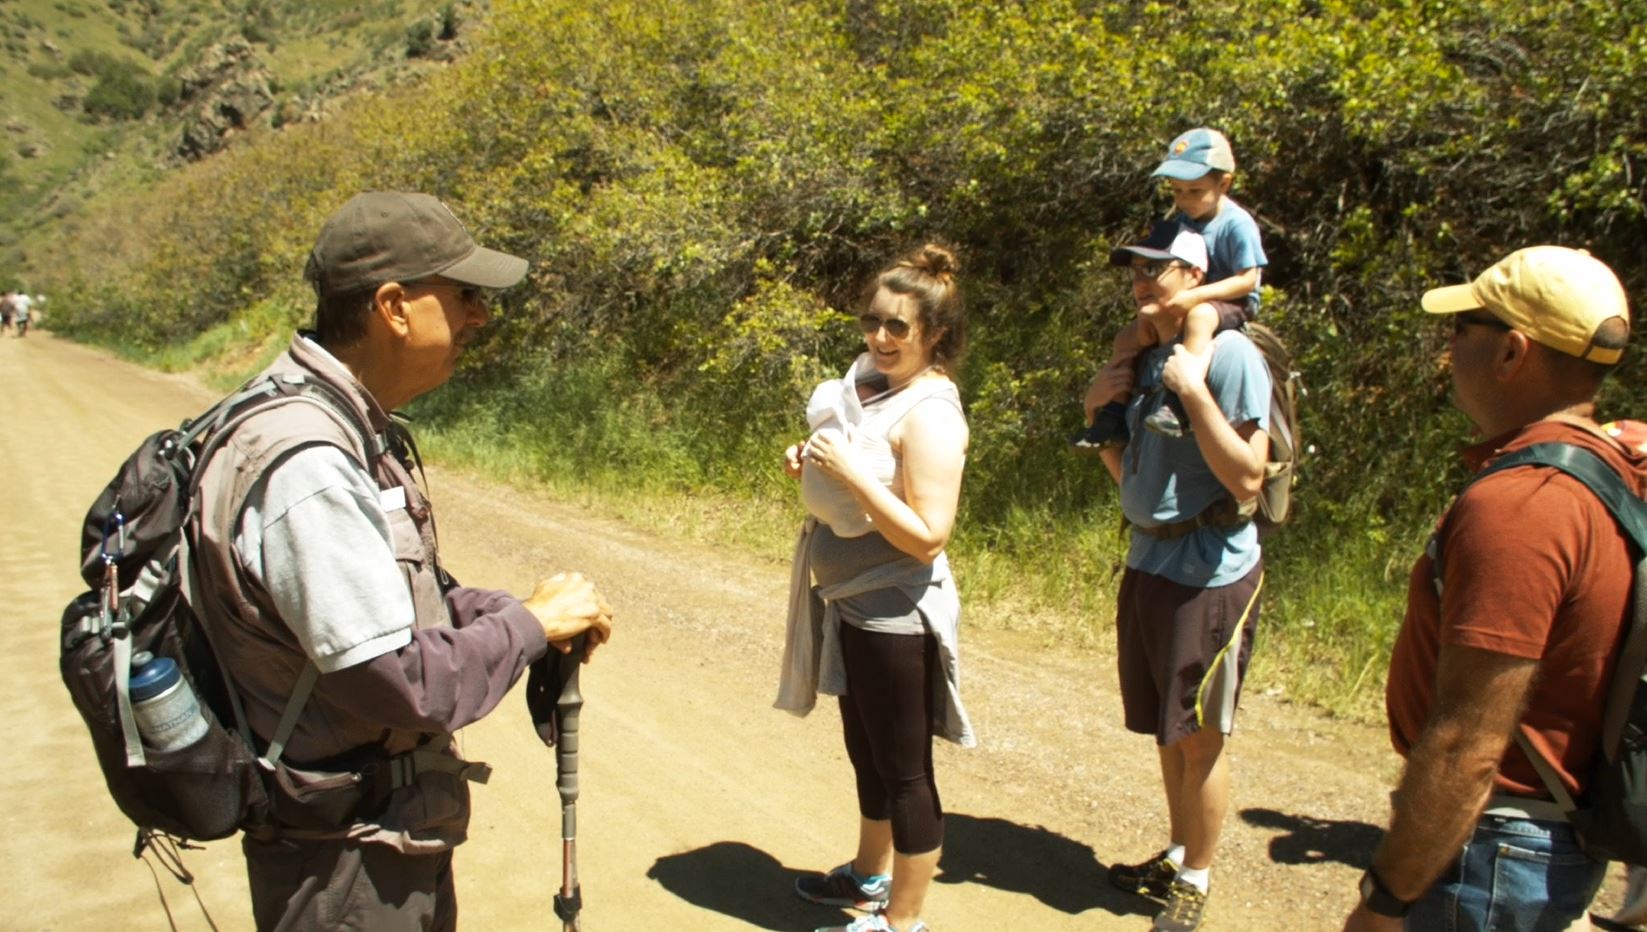 Paul Bleau, Colorado Parks and Wildlife ambassador, answers questions from visitors in Waterton Canyon.